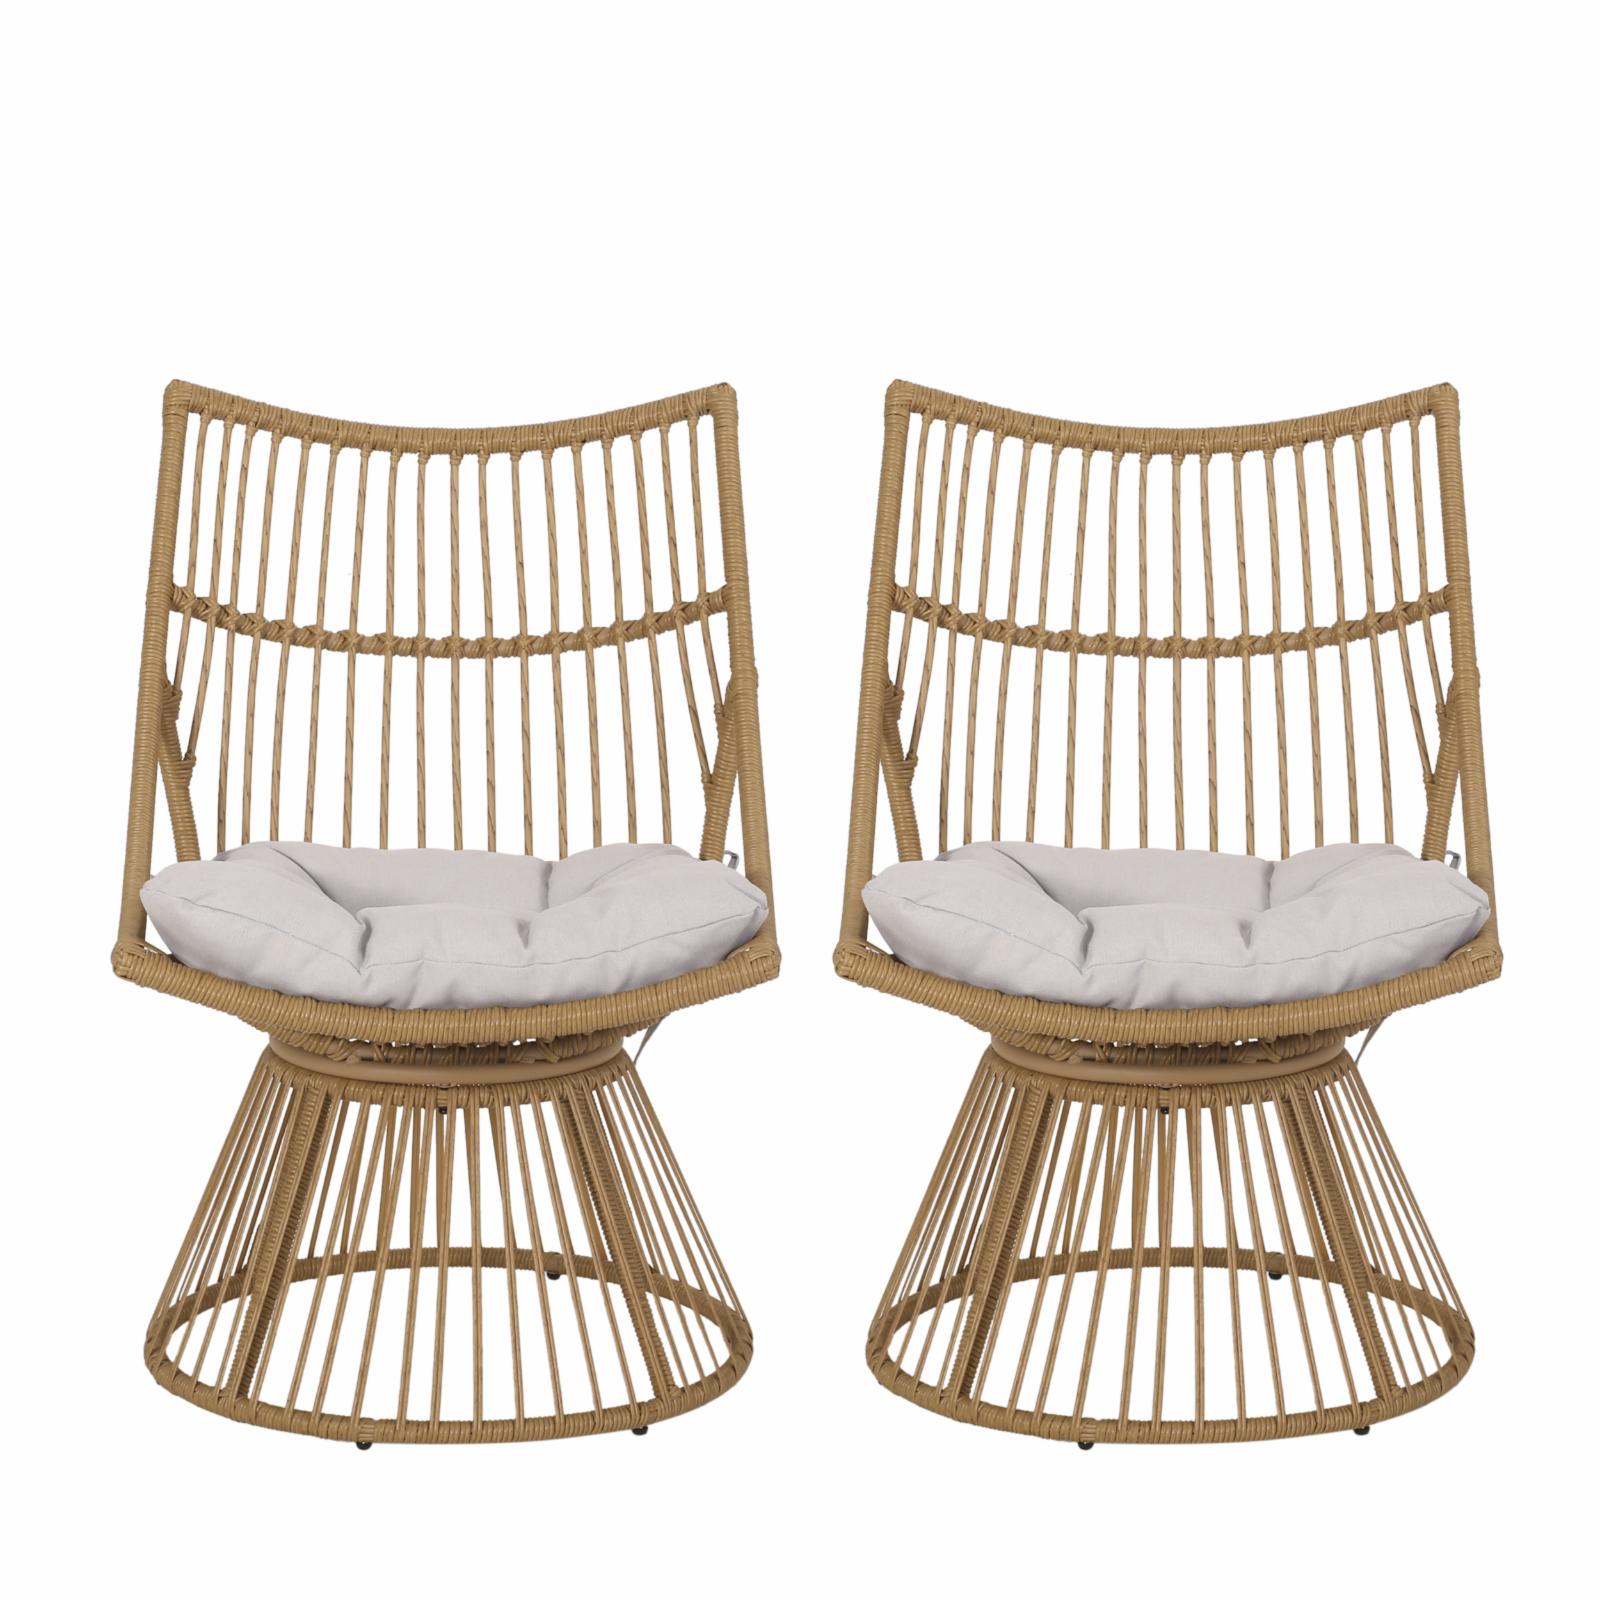 Taaliah Outdoor Wicker High Back Lounge Chairs with Cushion - Set of 2 - image 1 of 10